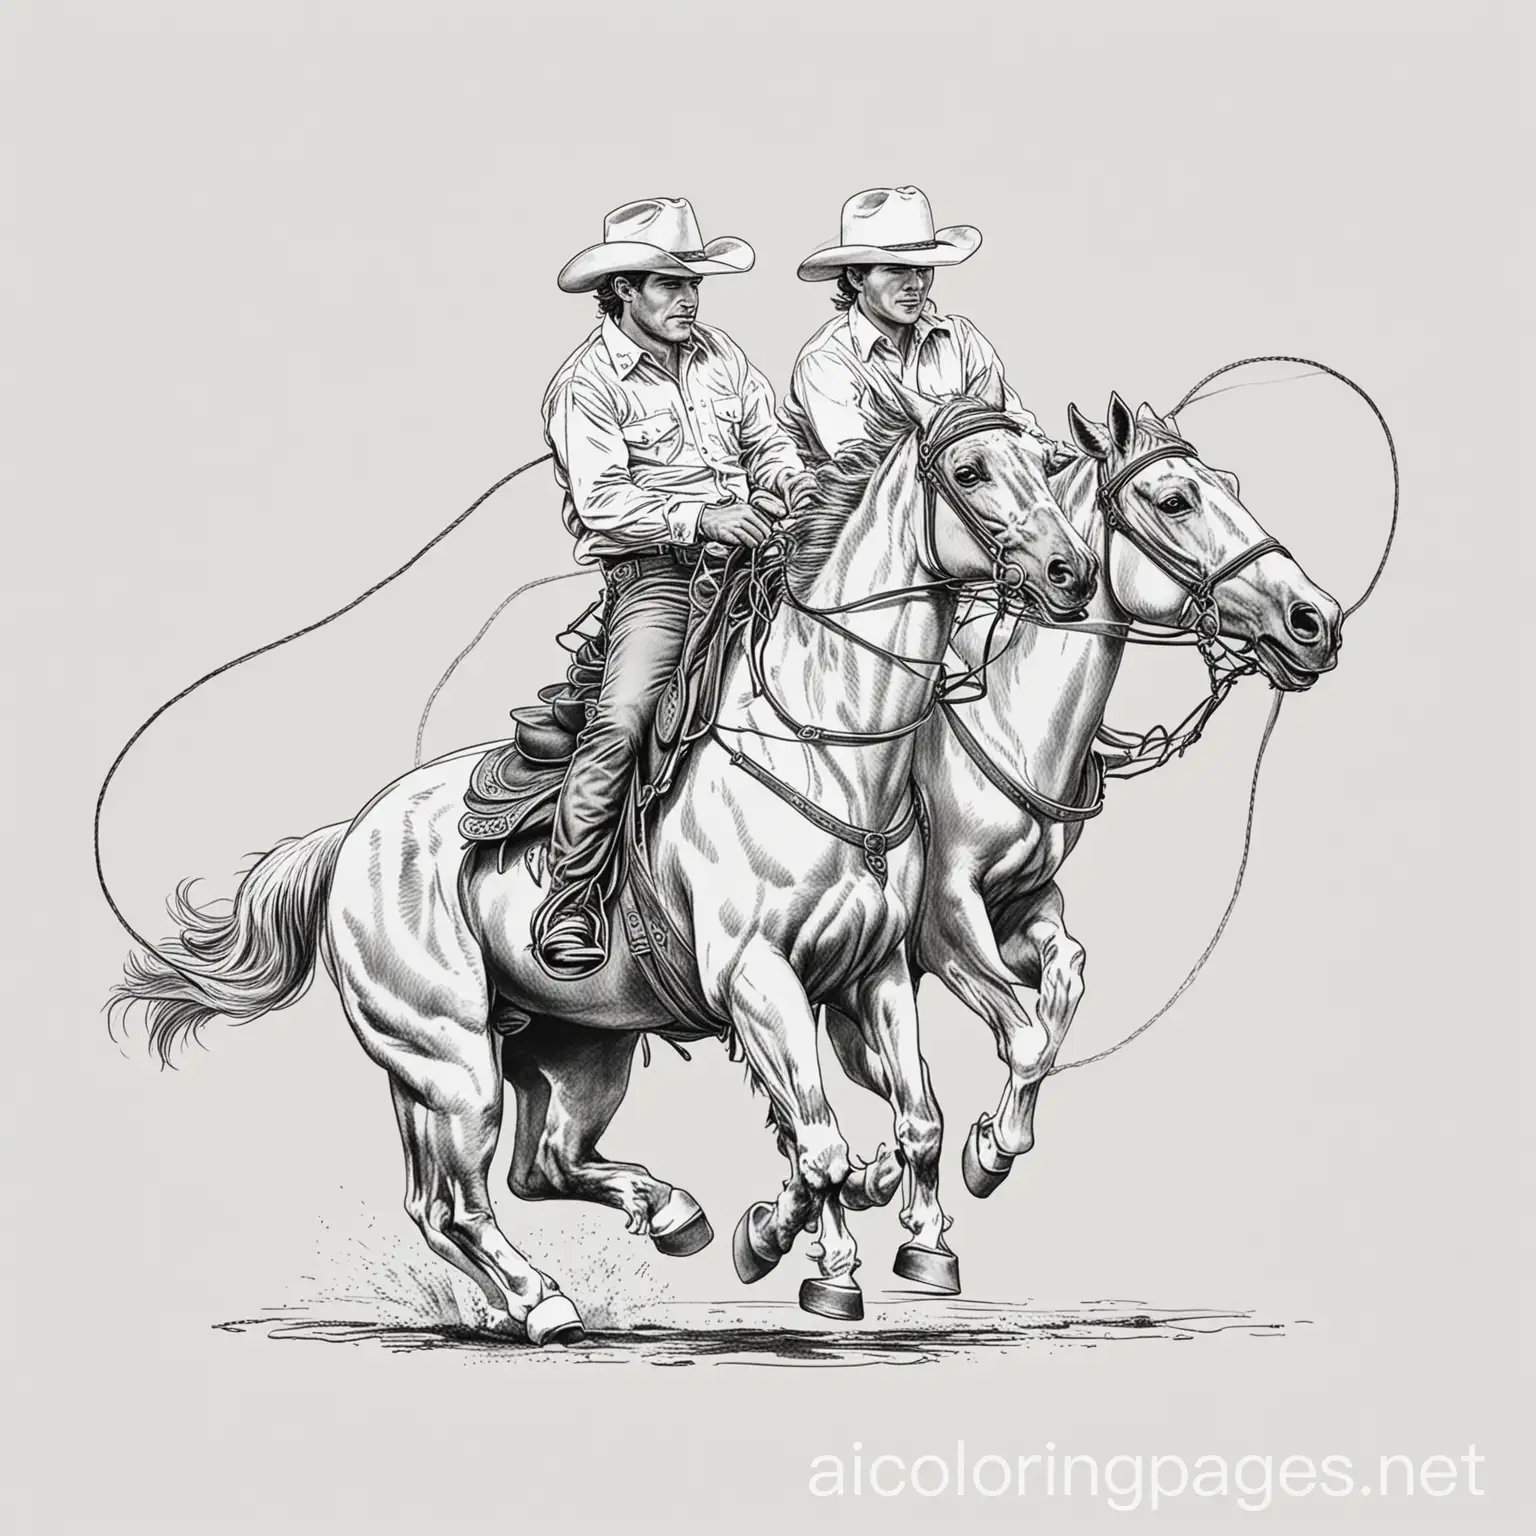 team roping  at rodeo coloring page, Coloring Page, black and white, line art, white background, Simplicity, Ample White Space. The background of the coloring page is plain white to make it easy for young children to color within the lines. The outlines of all the subjects are easy to distinguish, making it simple for kids to color without too much difficulty